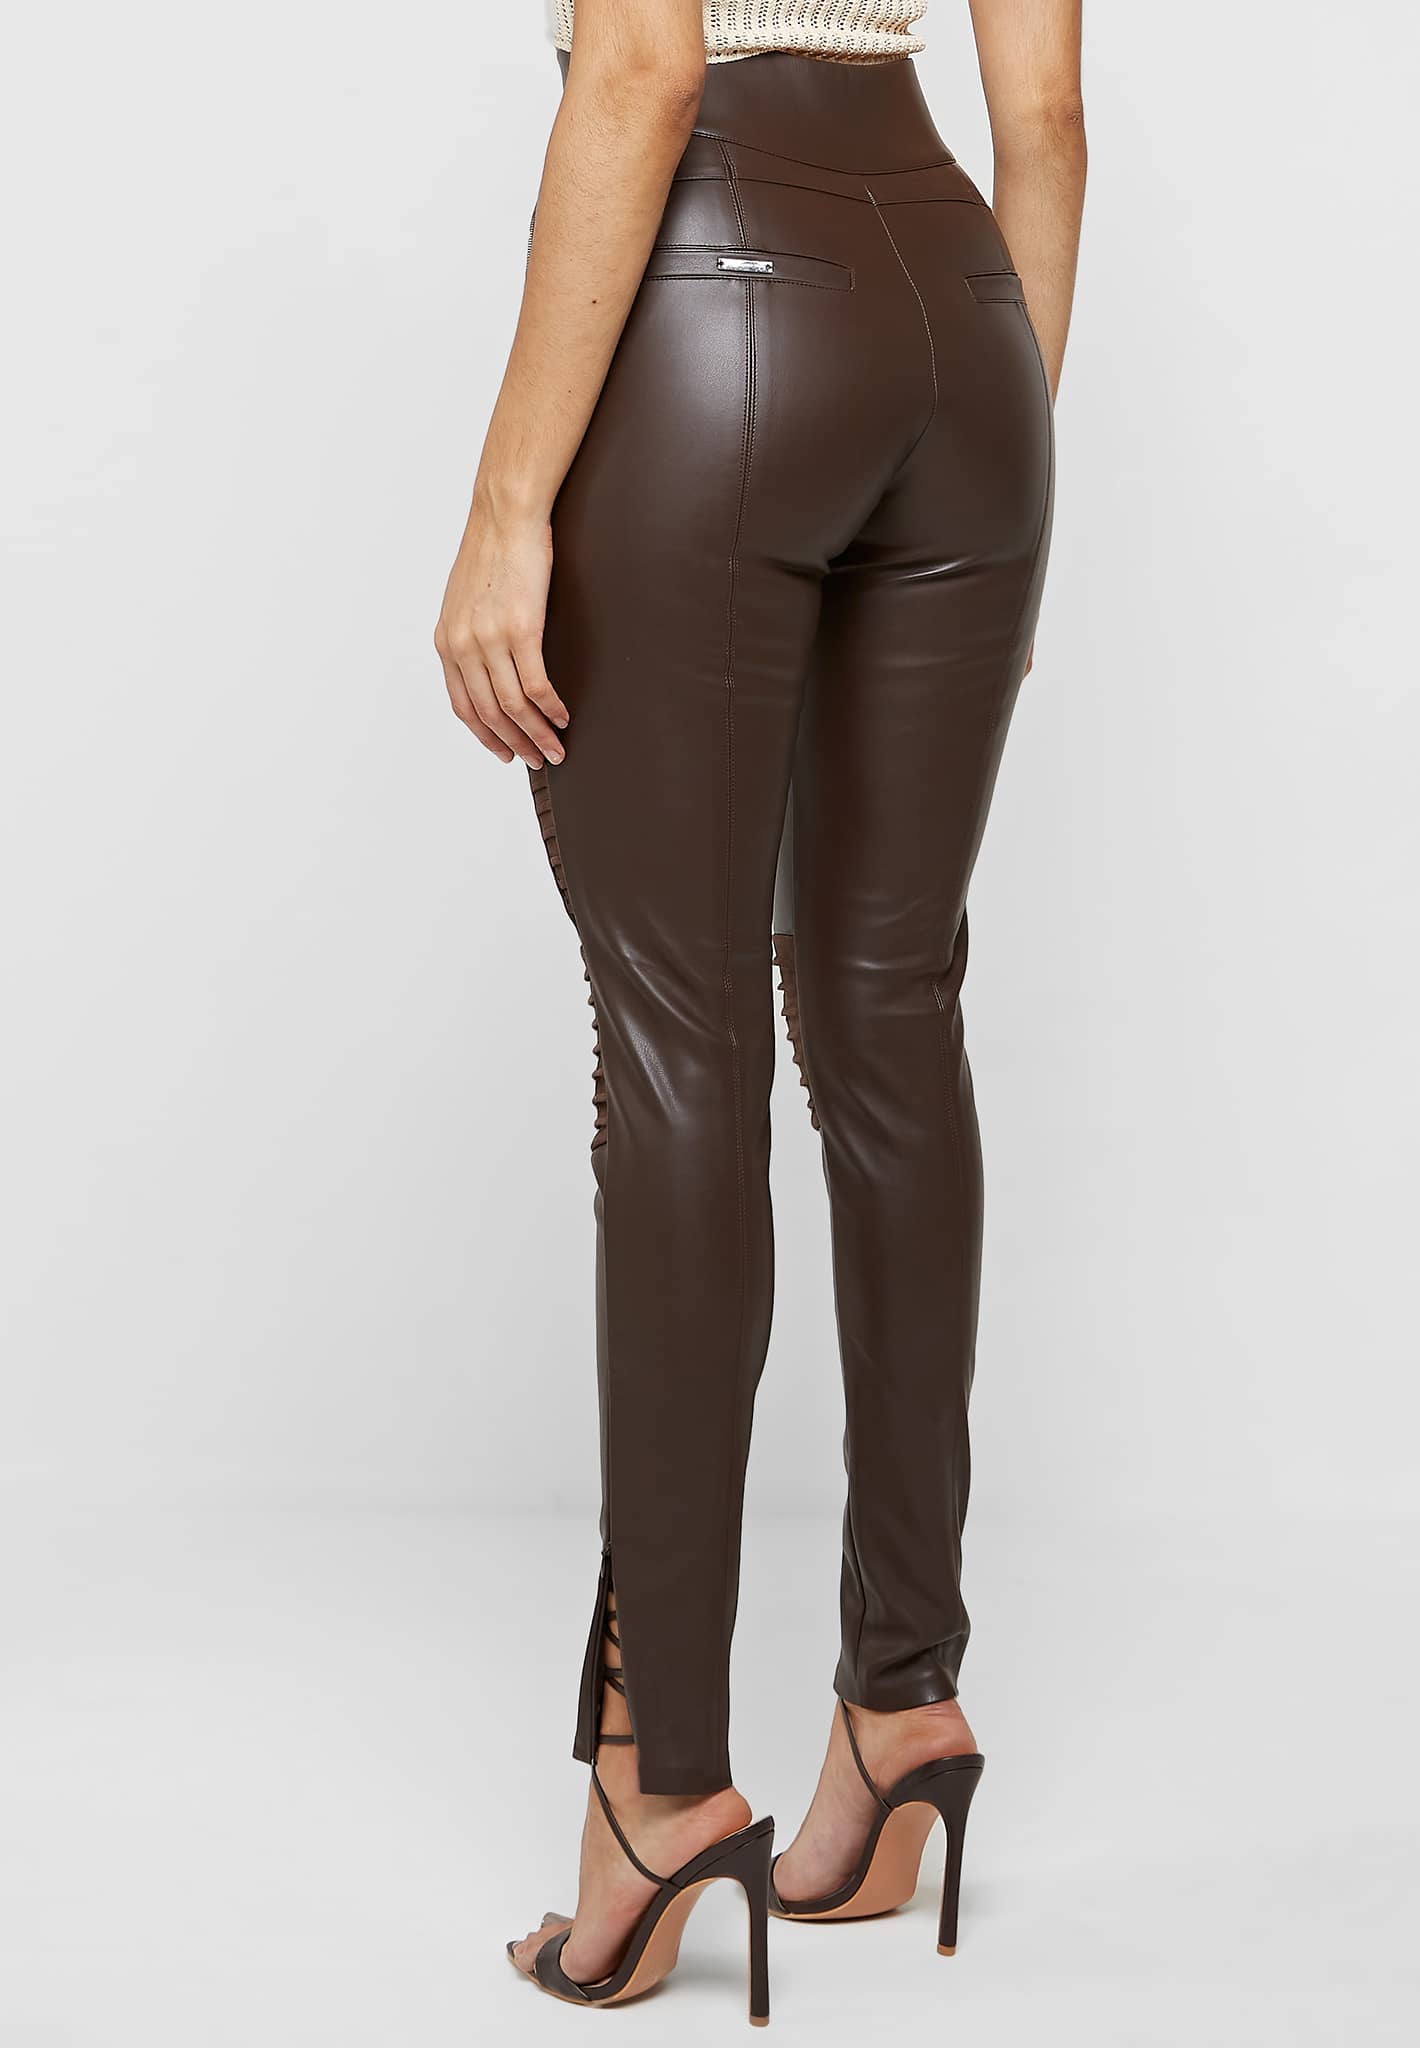 Thermal Leather-Look Leggings Calzedonia, 52% OFF